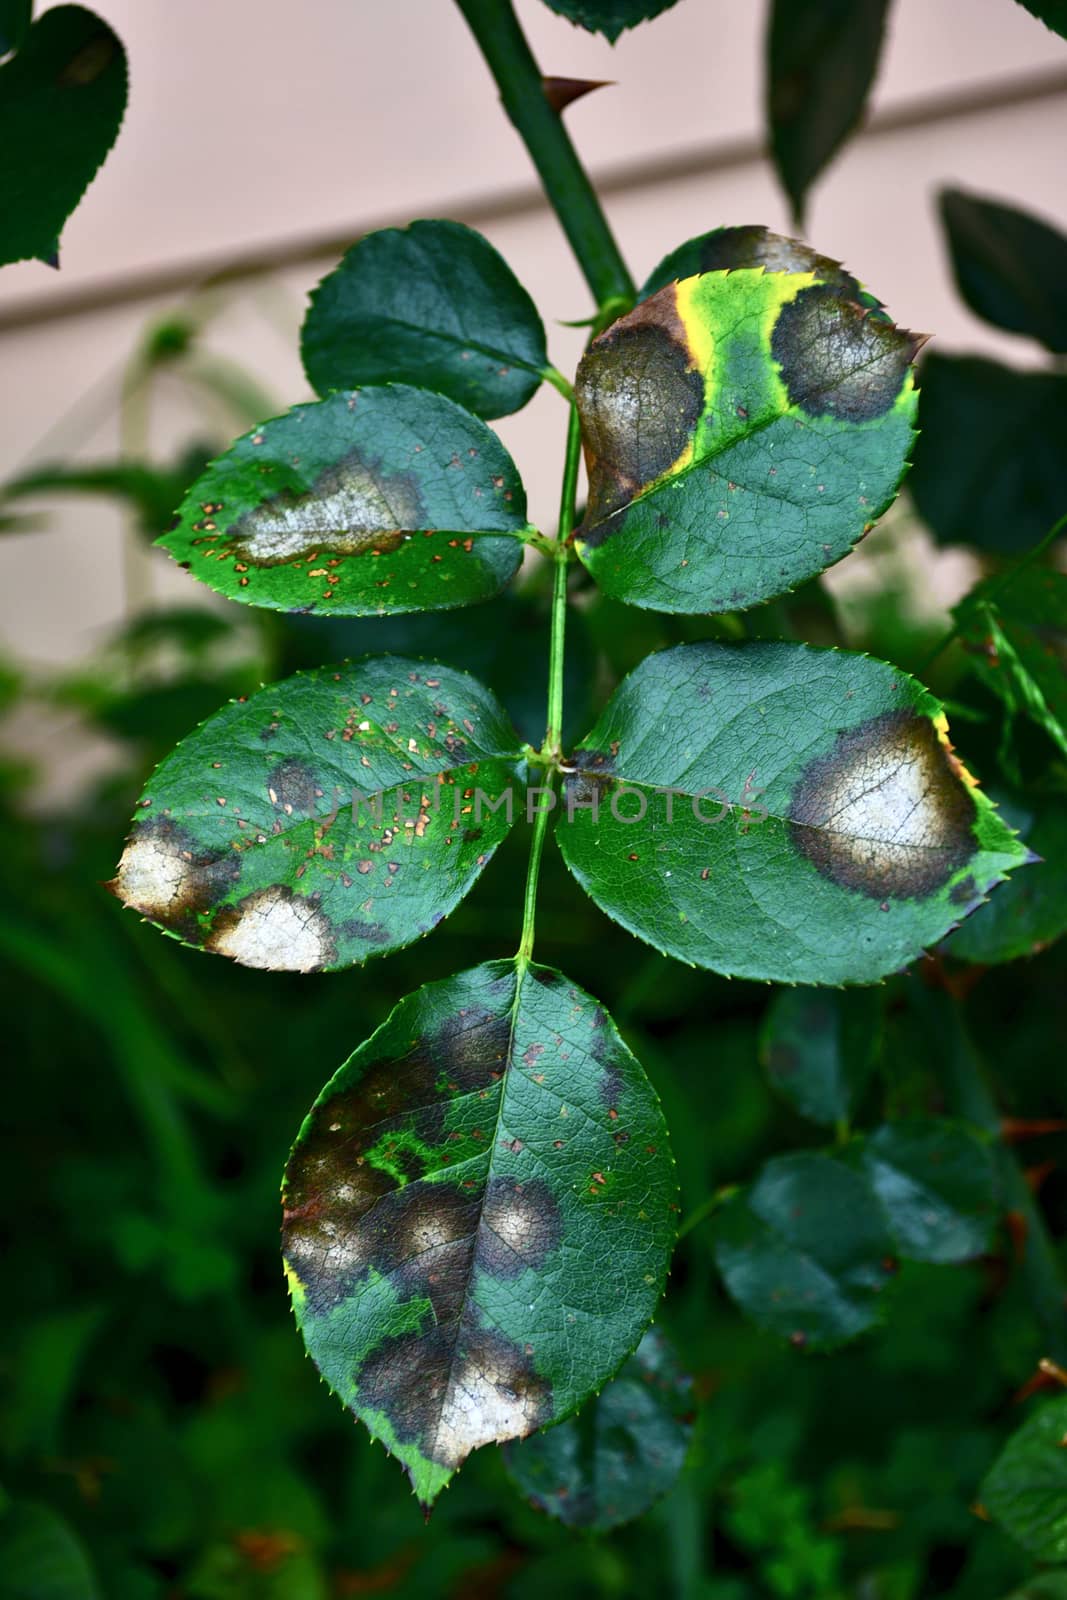 A close up of a rose leaf affected by black spot disease. This is the most serious disease of roses caused by a fungus, Diplocarpon rosae, which infects the leaves and greatly reduces plant vigour. by Marshalkina